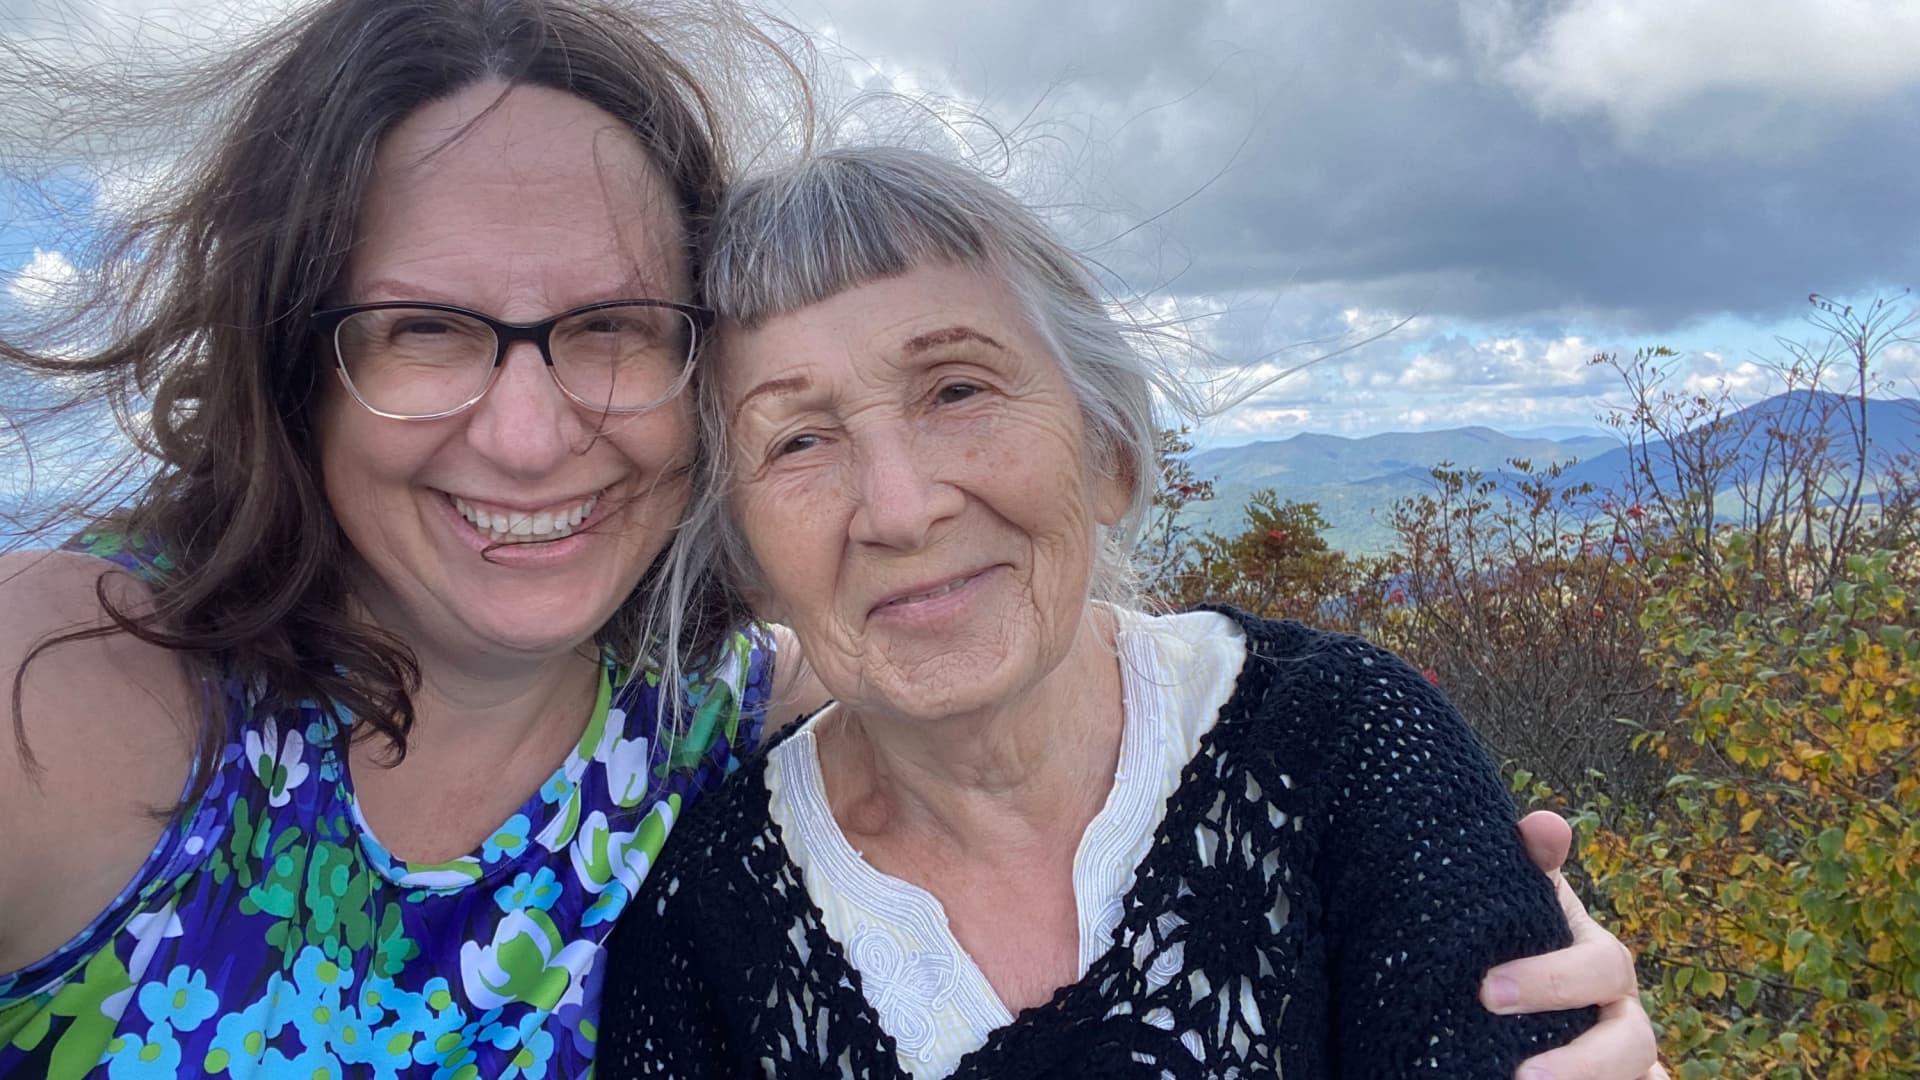 Lori McLeese, pictured with her mother on the Blue Ridge Parkway in Virginia, is about to take a second sabbatical. This time, she'll spend time at home with her mom and enjoy the outdoors.